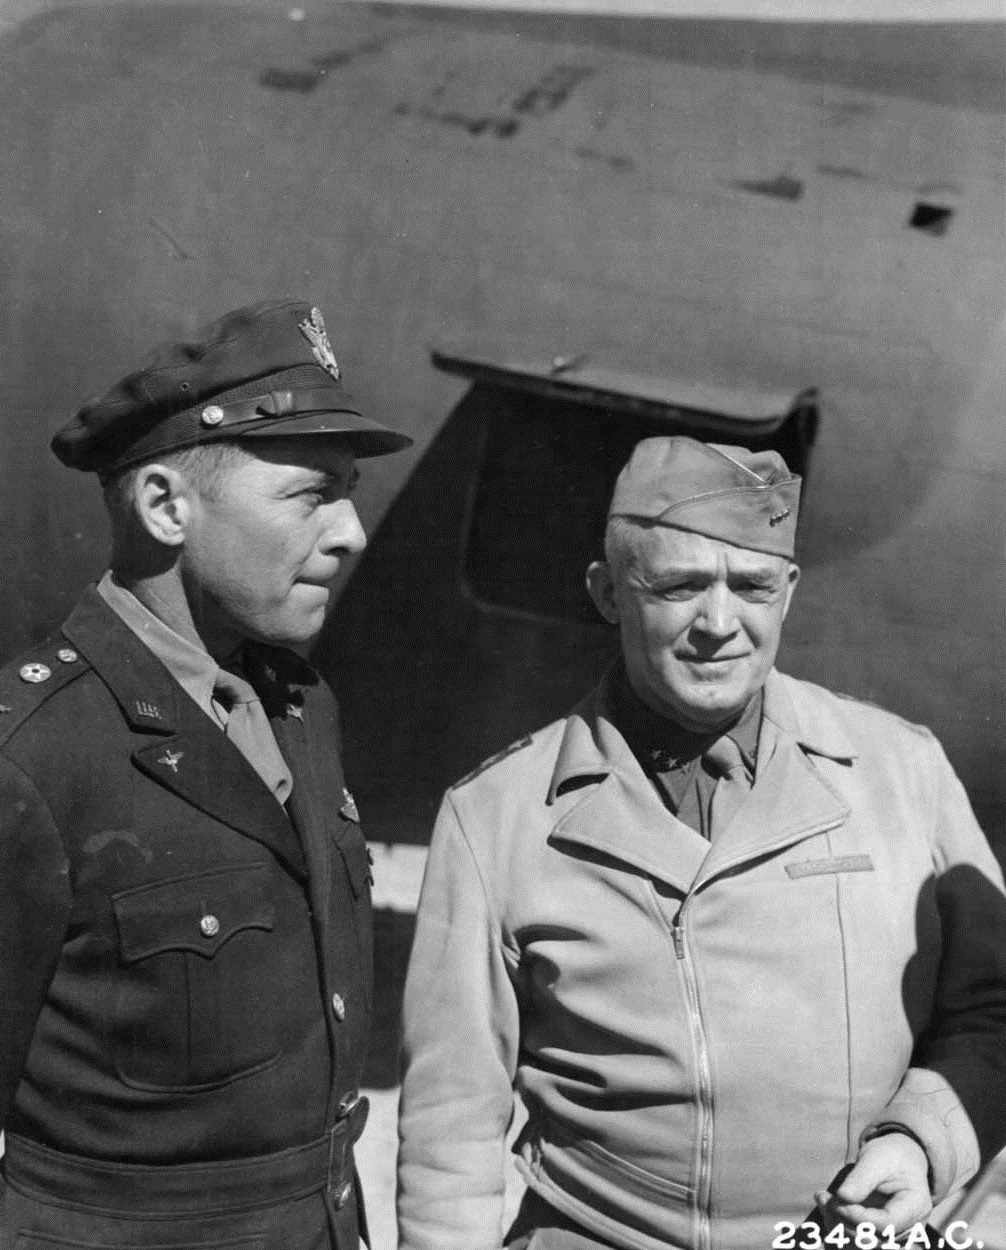 Colonel Jacob E. Smart, left, with Lieutenant General Henry H. ("Hap") Arnold, in China, February 1943. (U.S. Air Force)